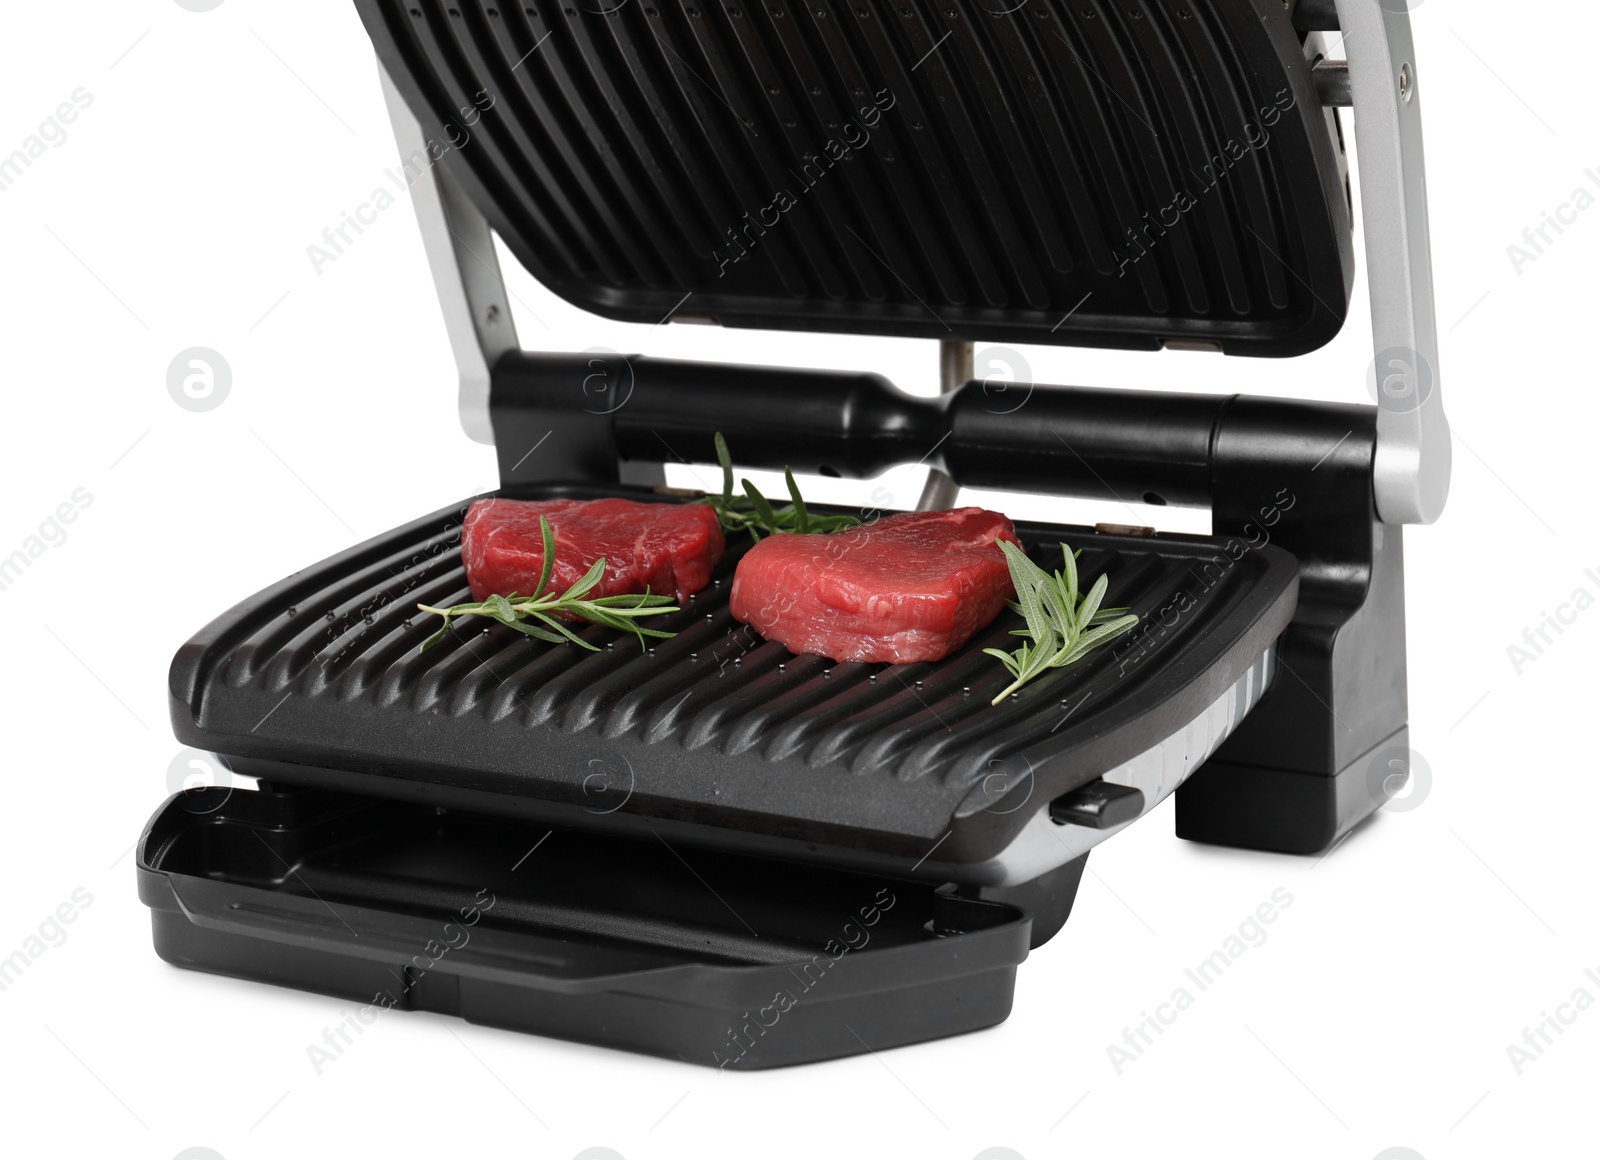 Photo of Electric grill with raw meat steaks and rosemary isolated on white